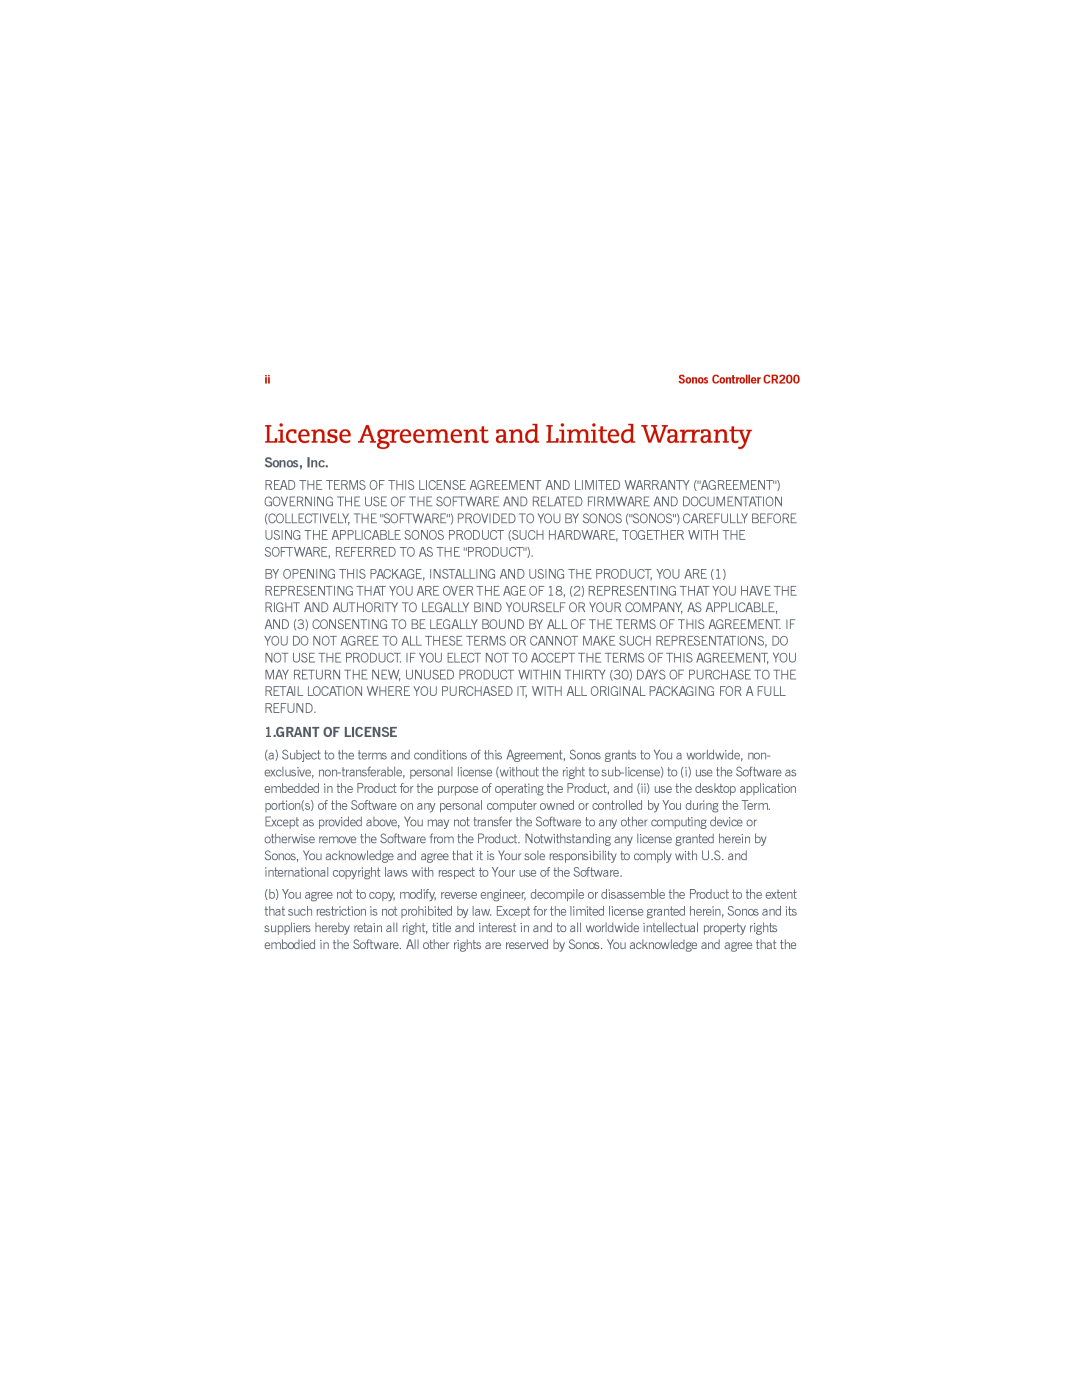 Sonos 200 manual License Agreement and Limited Warranty, English, Sonos, Inc, Grant Of License 